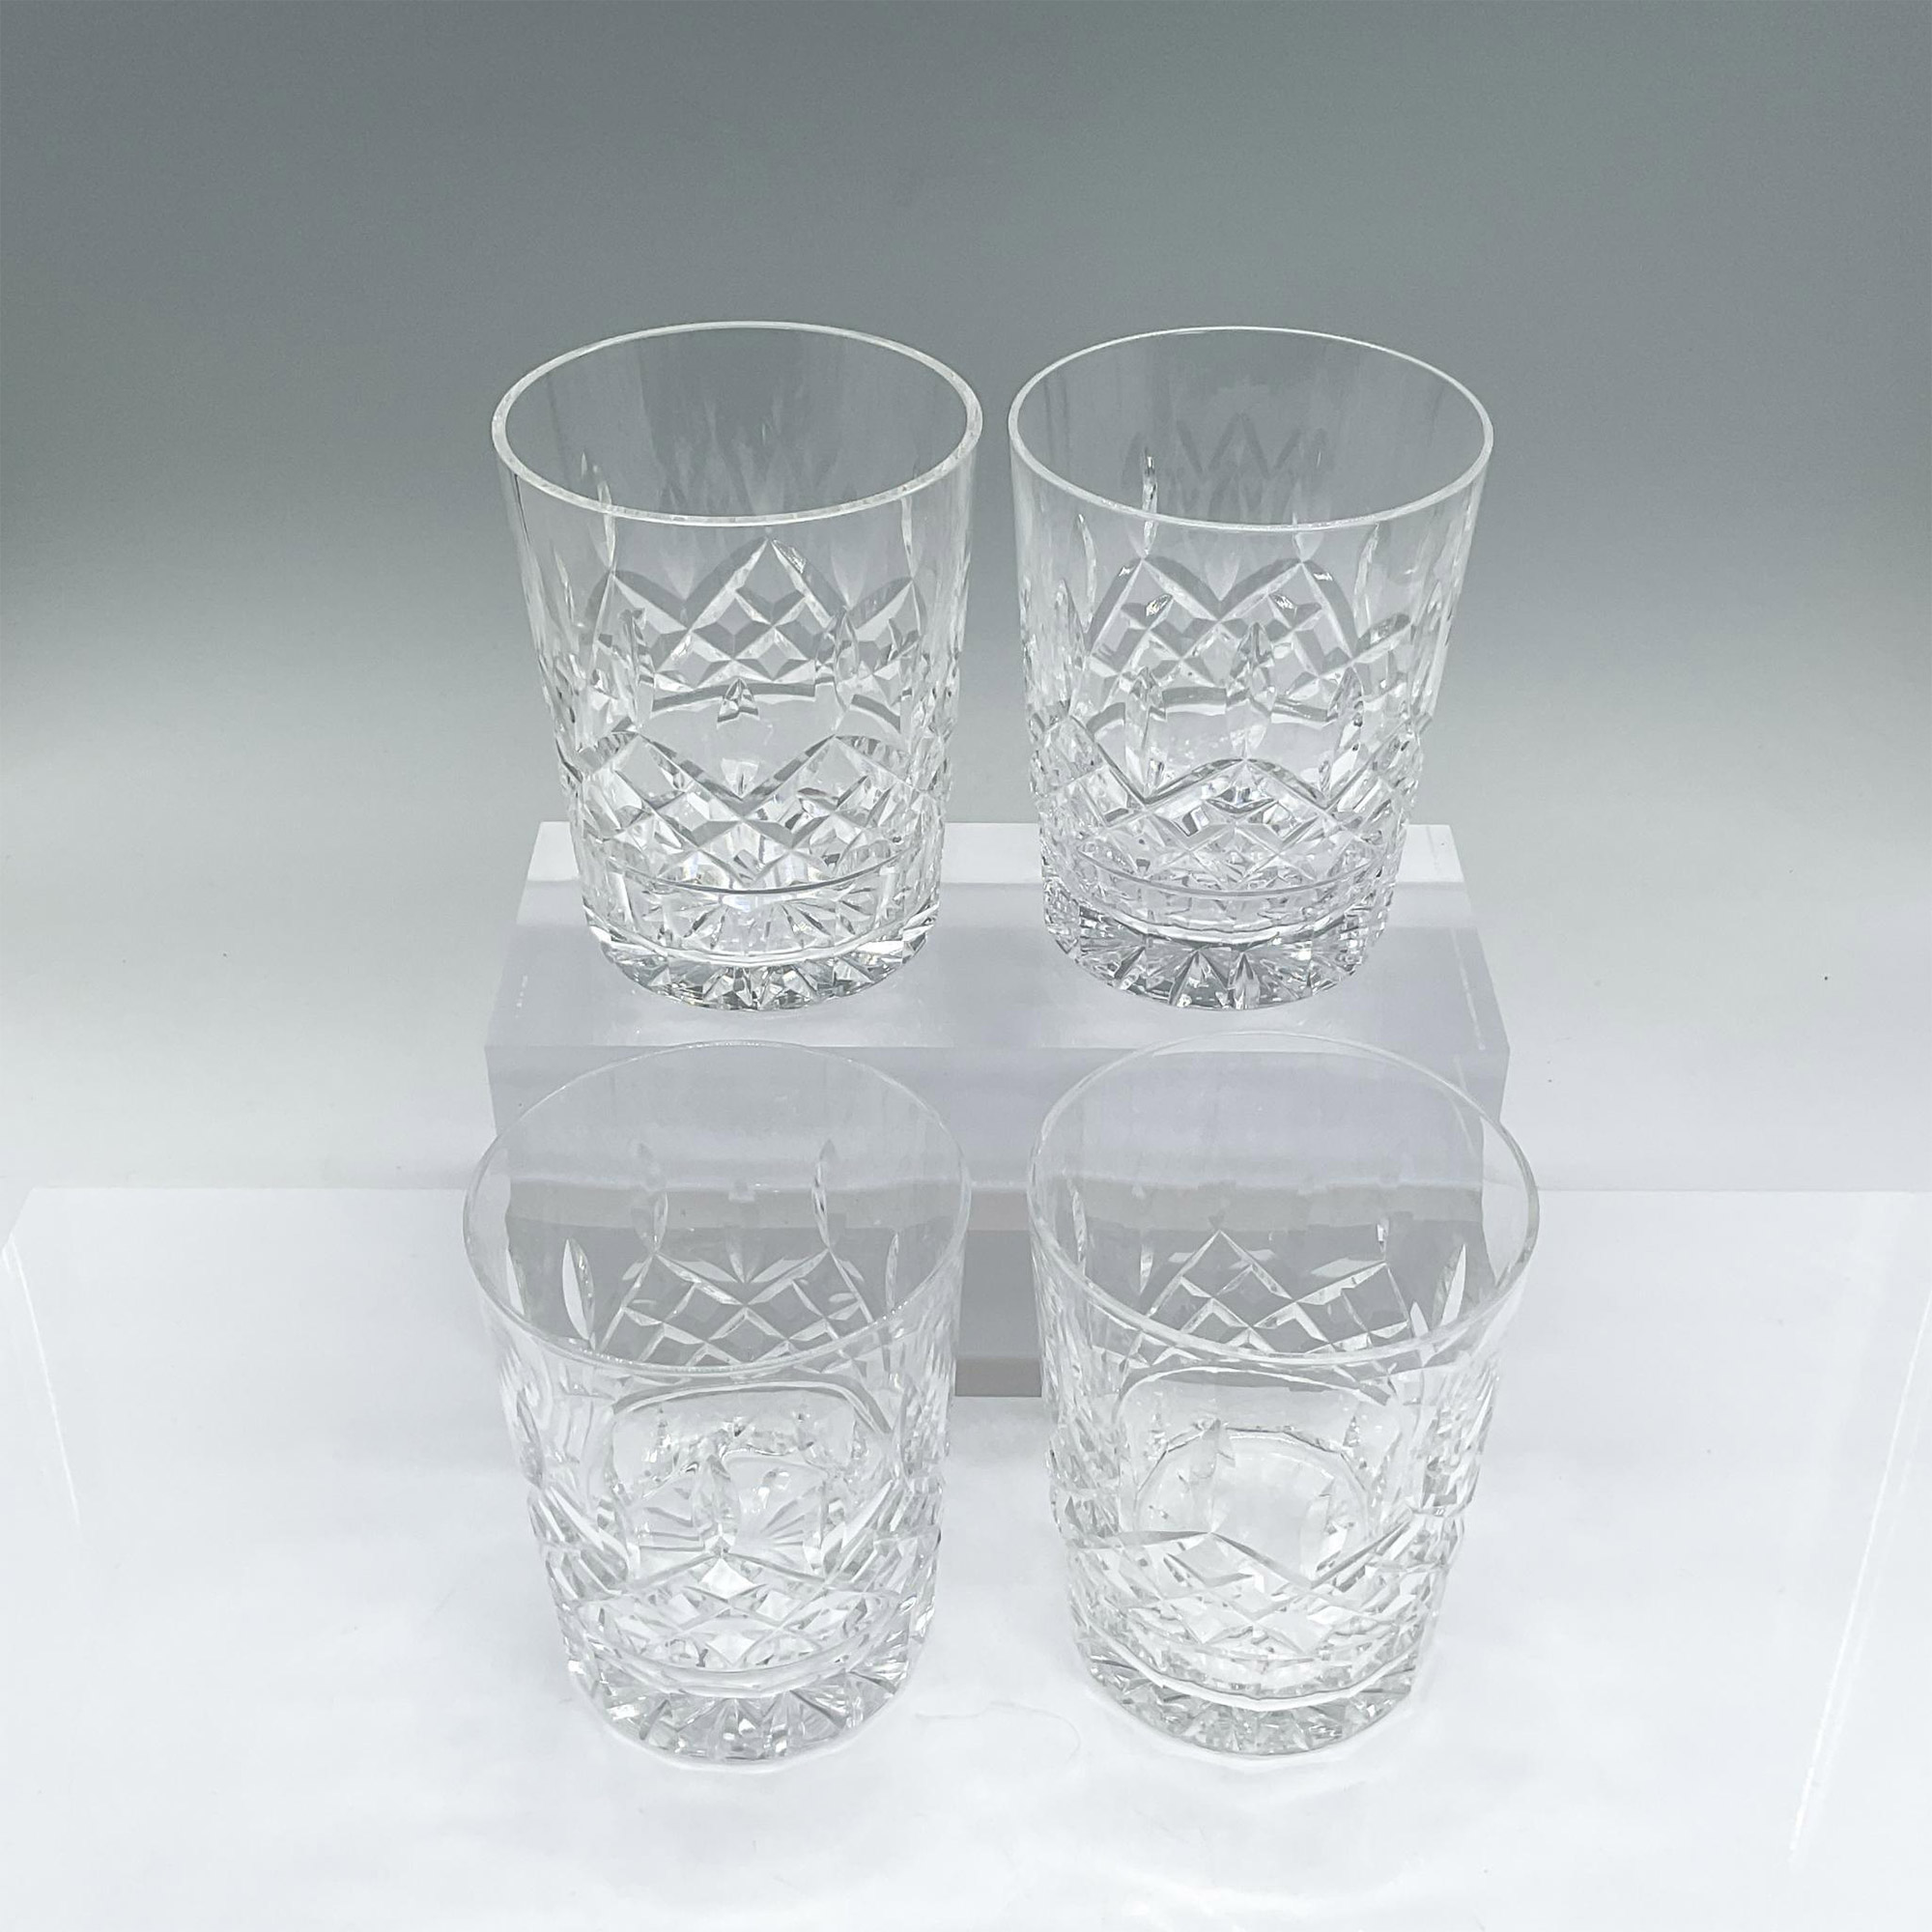 4pc Waterford Crystal Double Old Fashioned Glasses, Lismore - Image 2 of 3